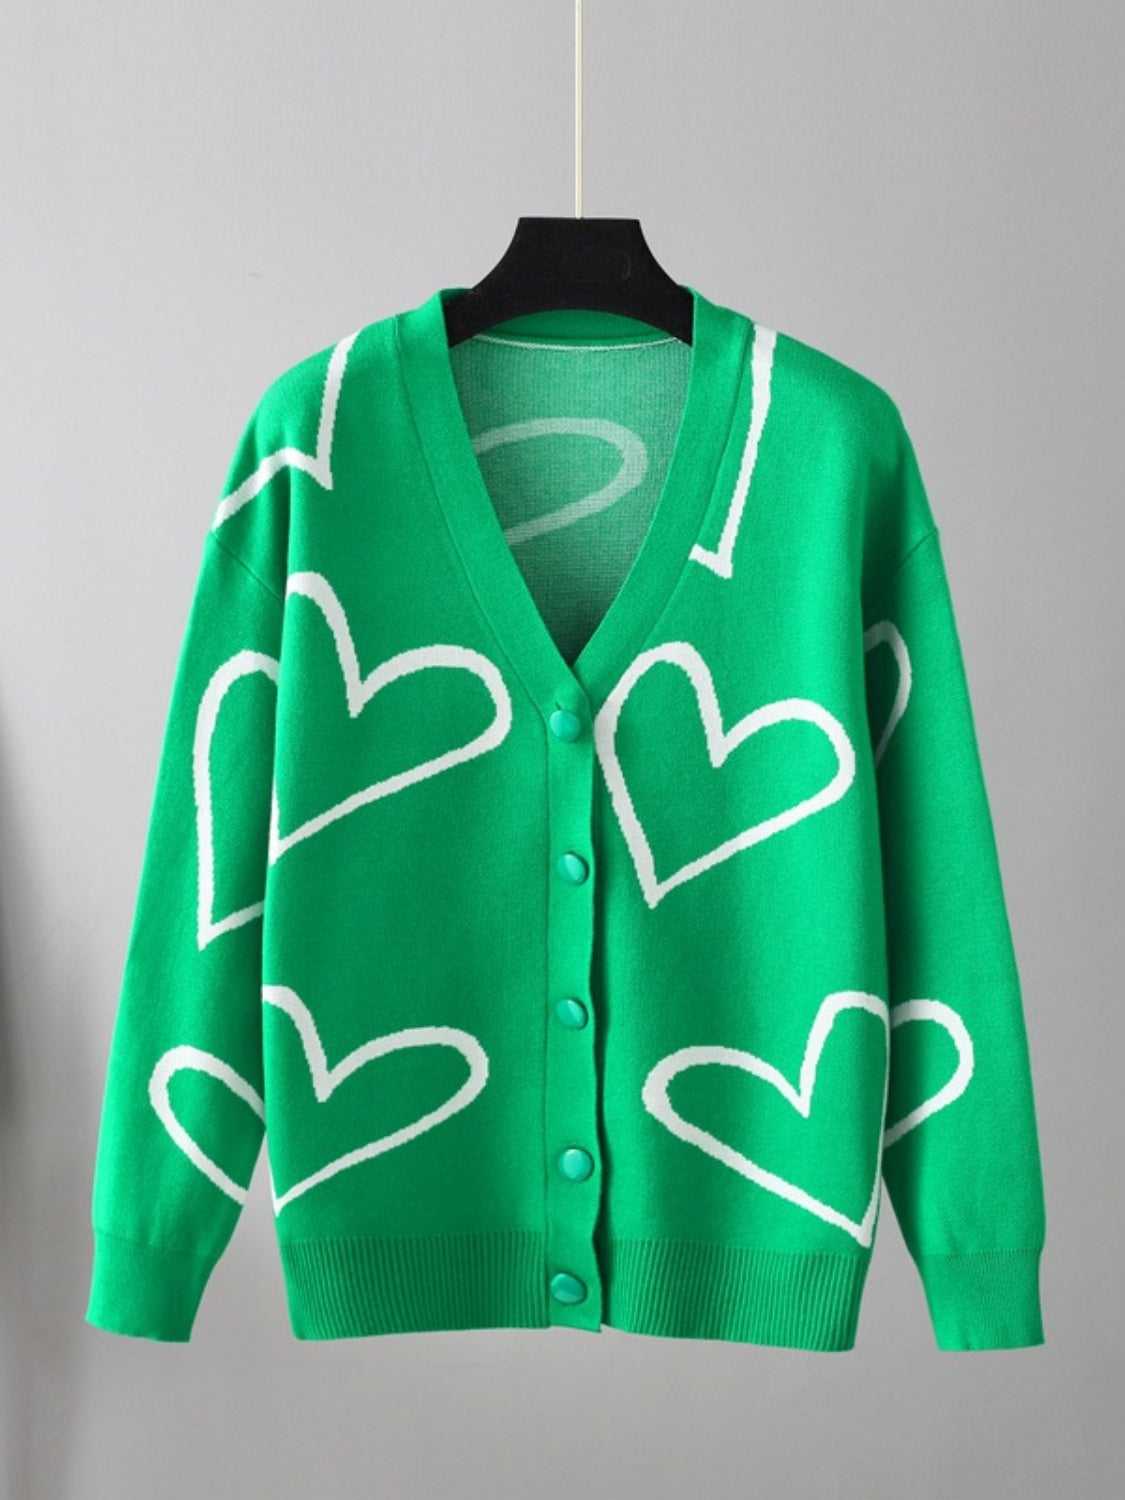 Heart Button Down Cardigan - Women’s Clothing & Accessories - Shirts & Tops - 12 - 2024